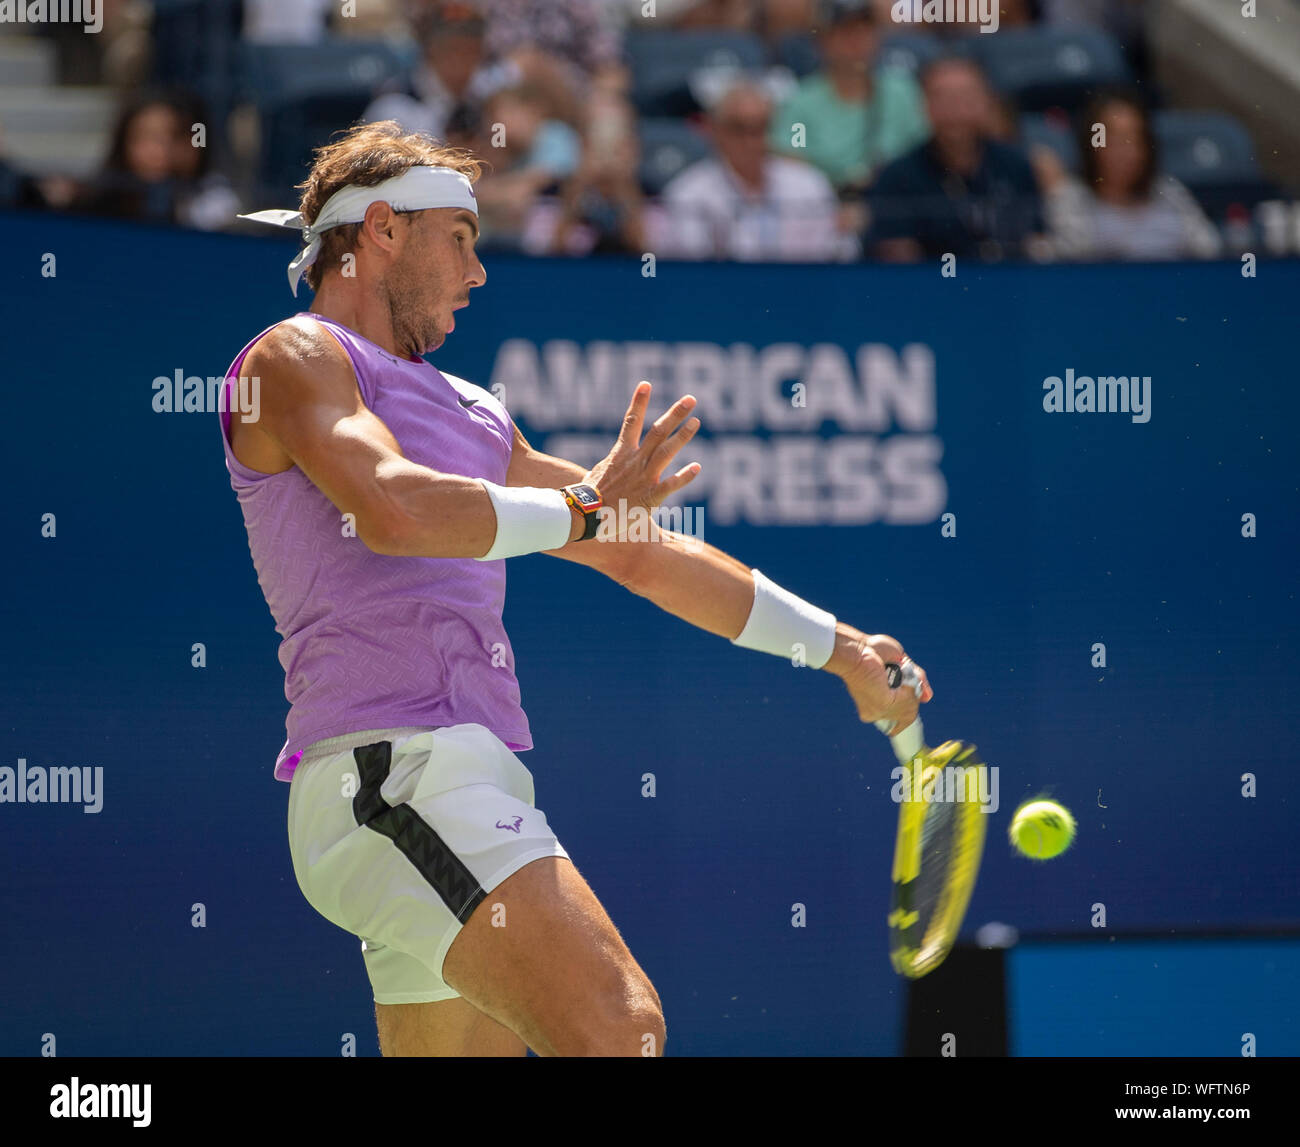 New York, USA. 31st Aug, 2019. August 31, 2019: Rafael Nadal (ESP) defeated Hyeon Chung (KOR) 6-4, 6-2, at the US Open being played at Billie Jean King National Tennis Center in Flushing, Queens, NY. Credit: Cal Sport Media/Alamy Live News Stock Photo